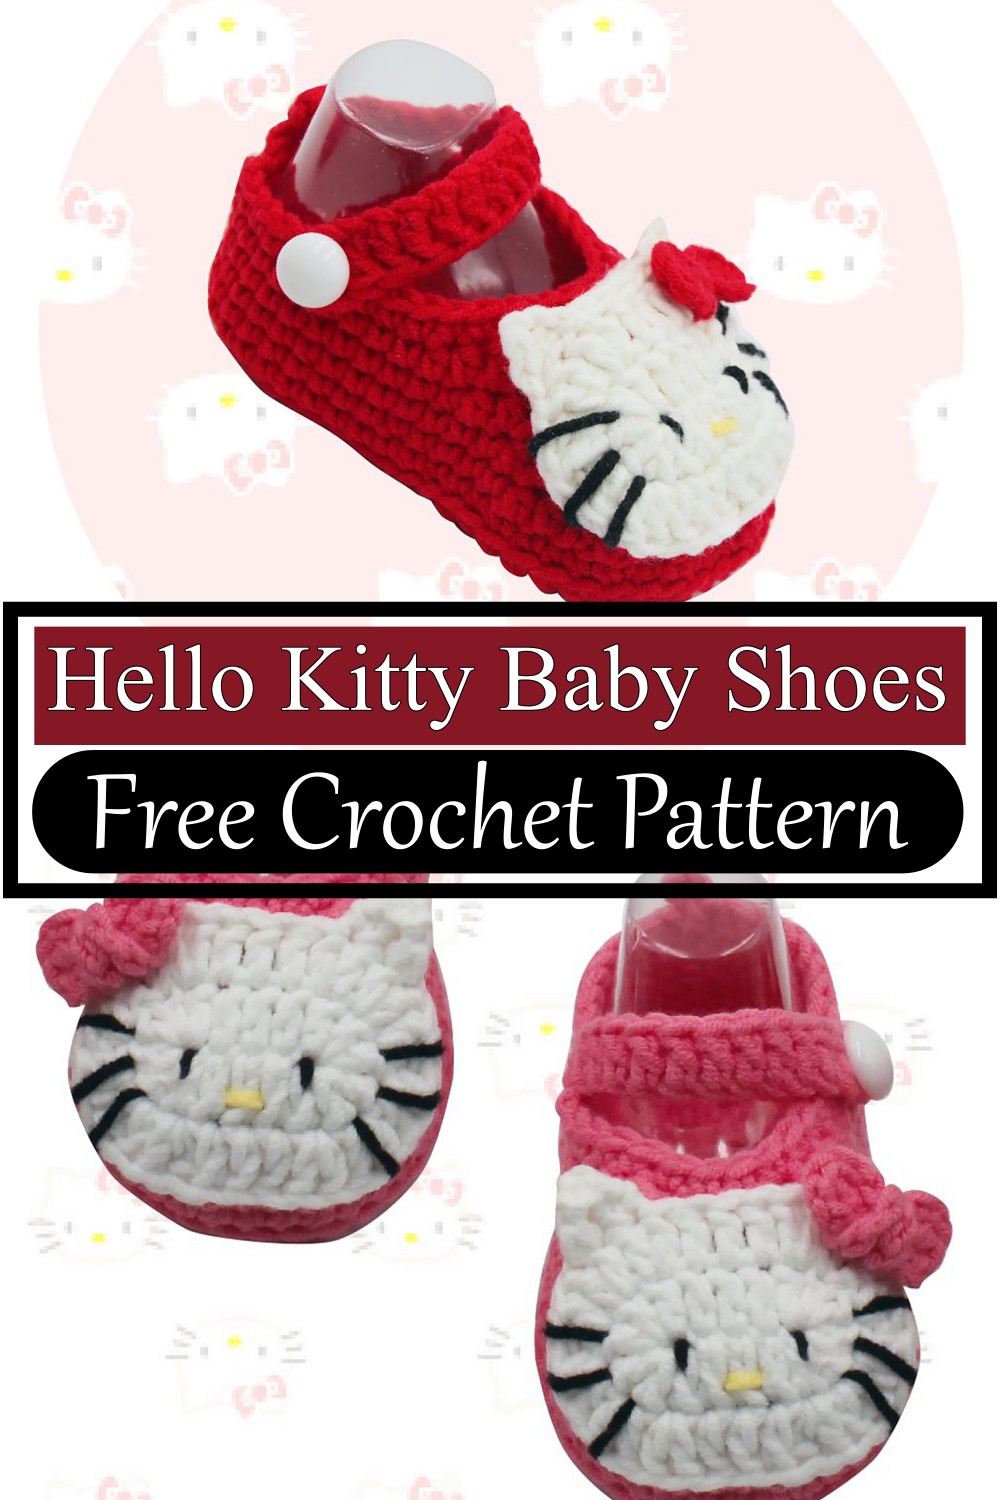 Hello Kitty Baby Shoes